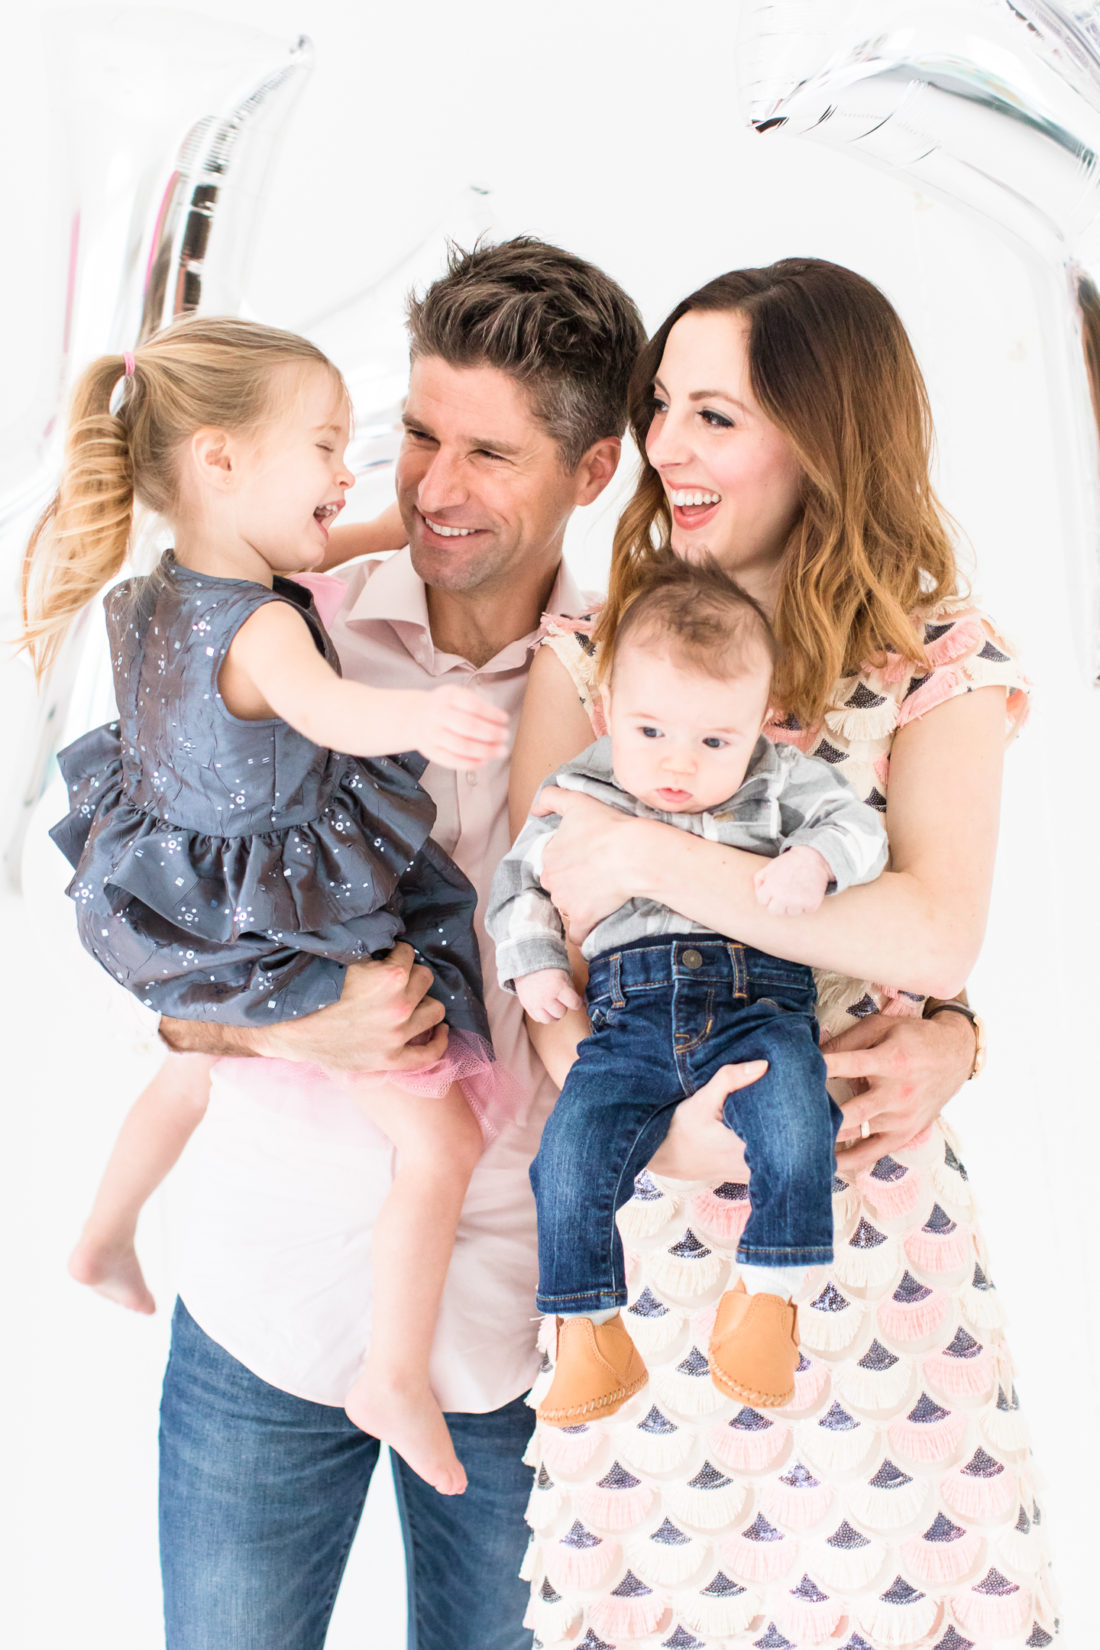 Eva Amurri Martino, Kyle Martino, and their children Marlowe and Major celebrate Valentine's Day at their home in Connecticut